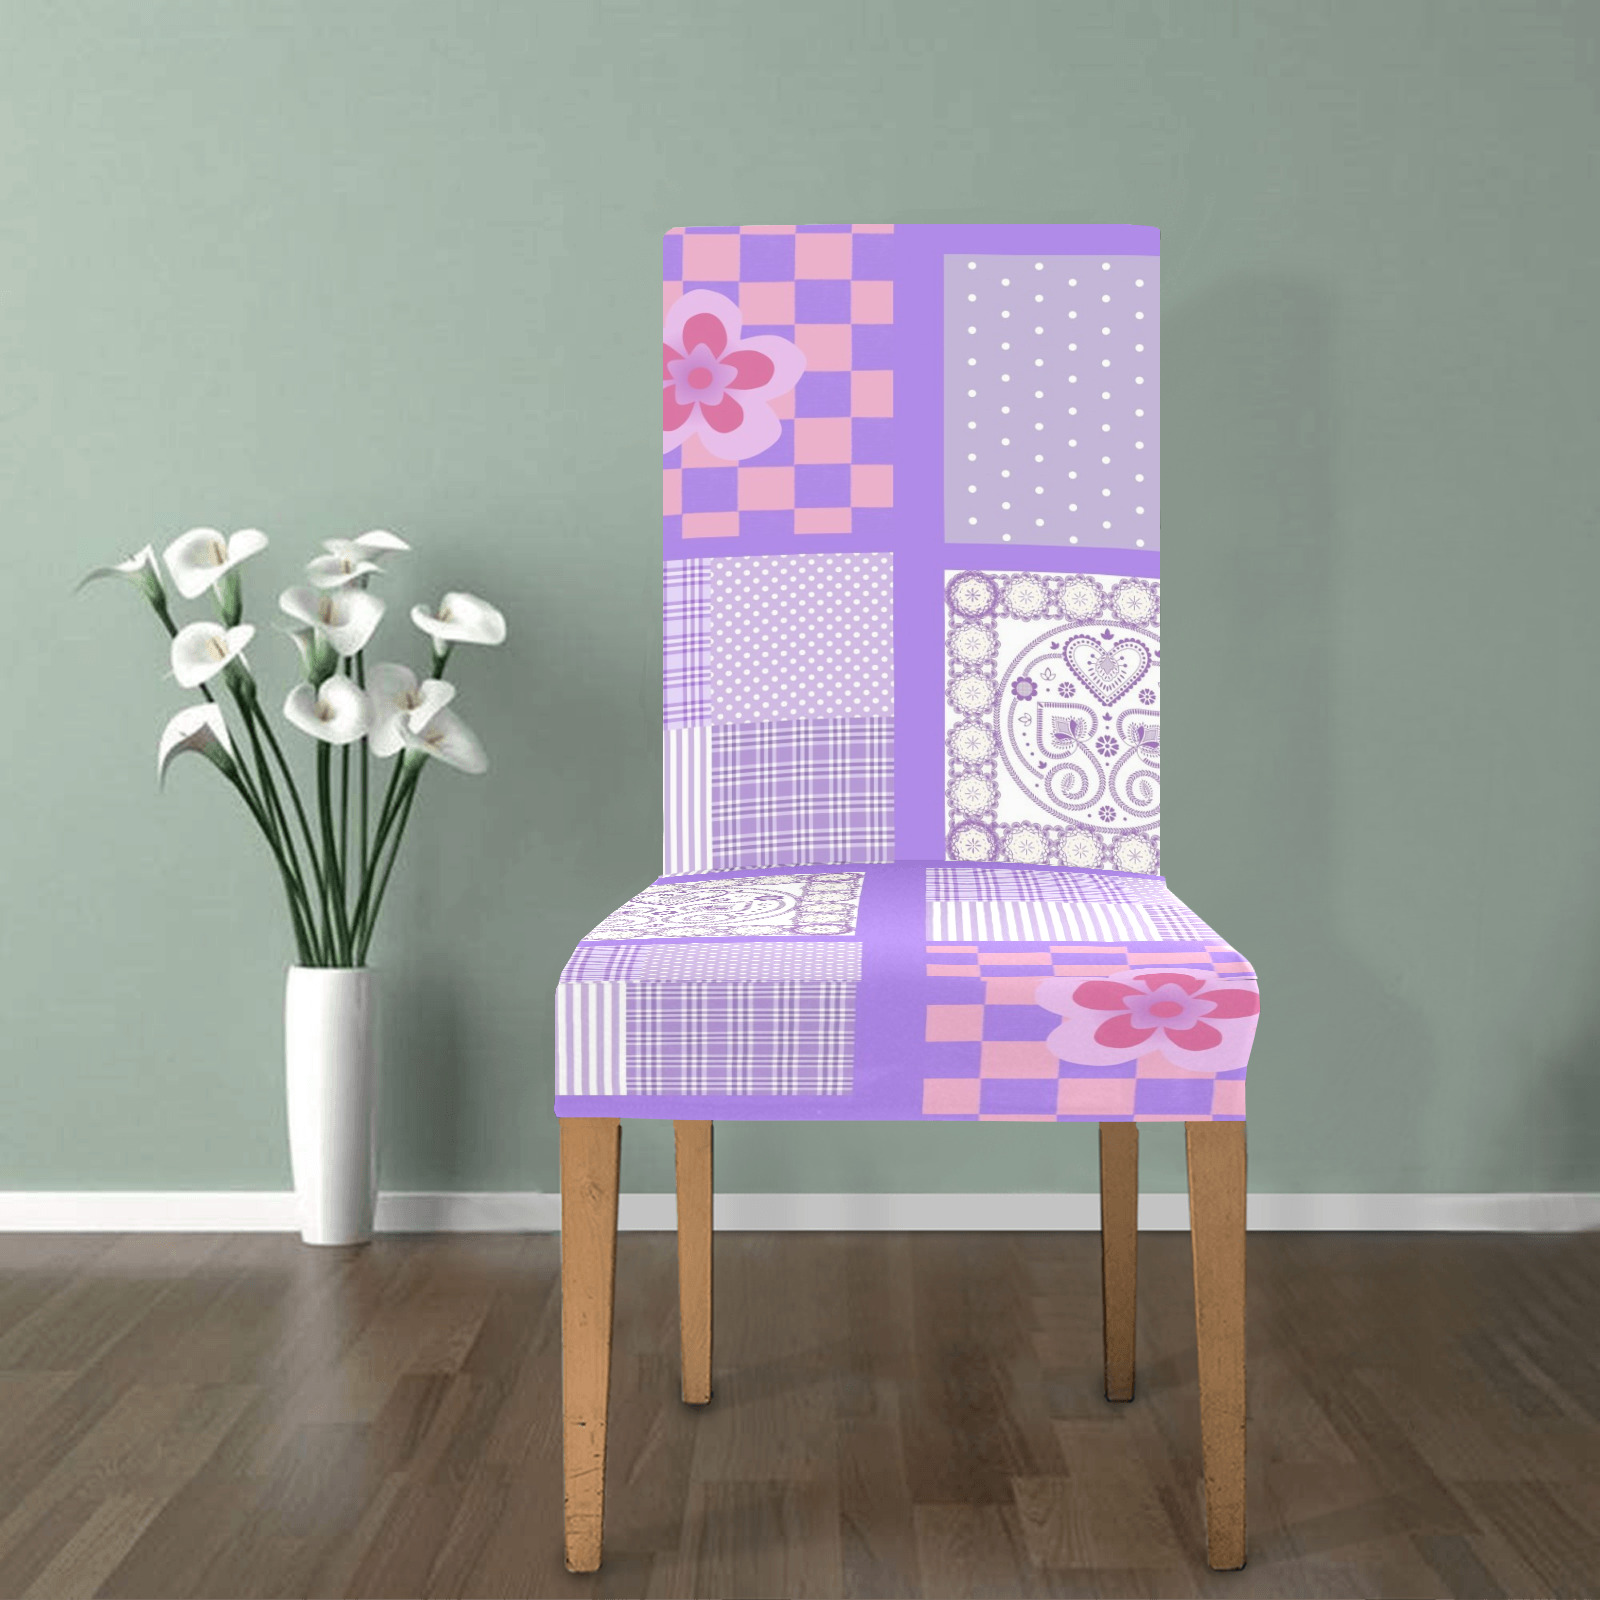 Pink and Purple Patchwork Design Chair Cover (Pack of 6)